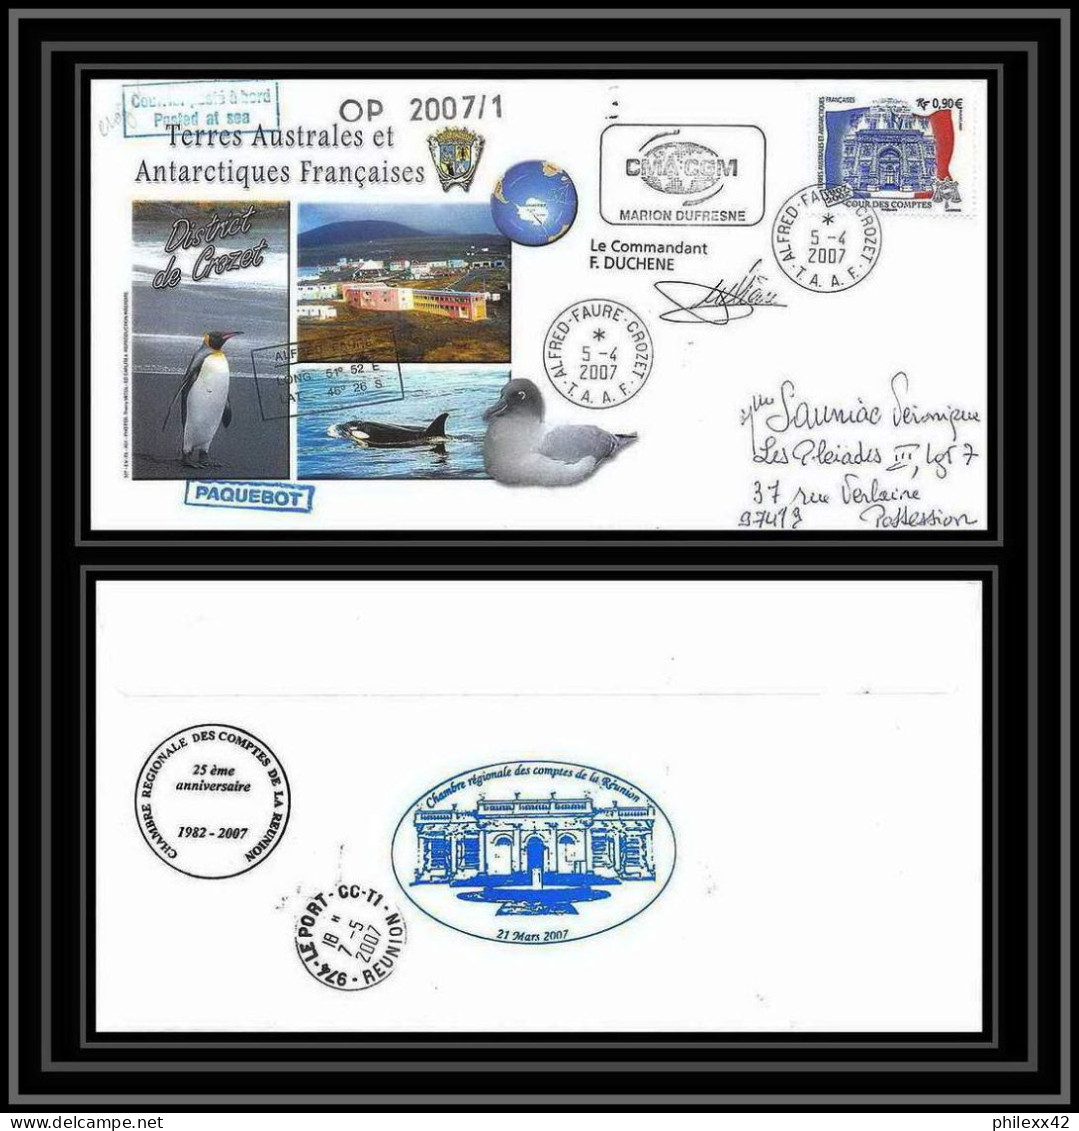 2674 ANTARCTIC Terres Australes TAAF Lettre Cover Dufresne 2 Signé Signed Op 2007/1 Crozet 5/4/2007 N°471 - Covers & Documents